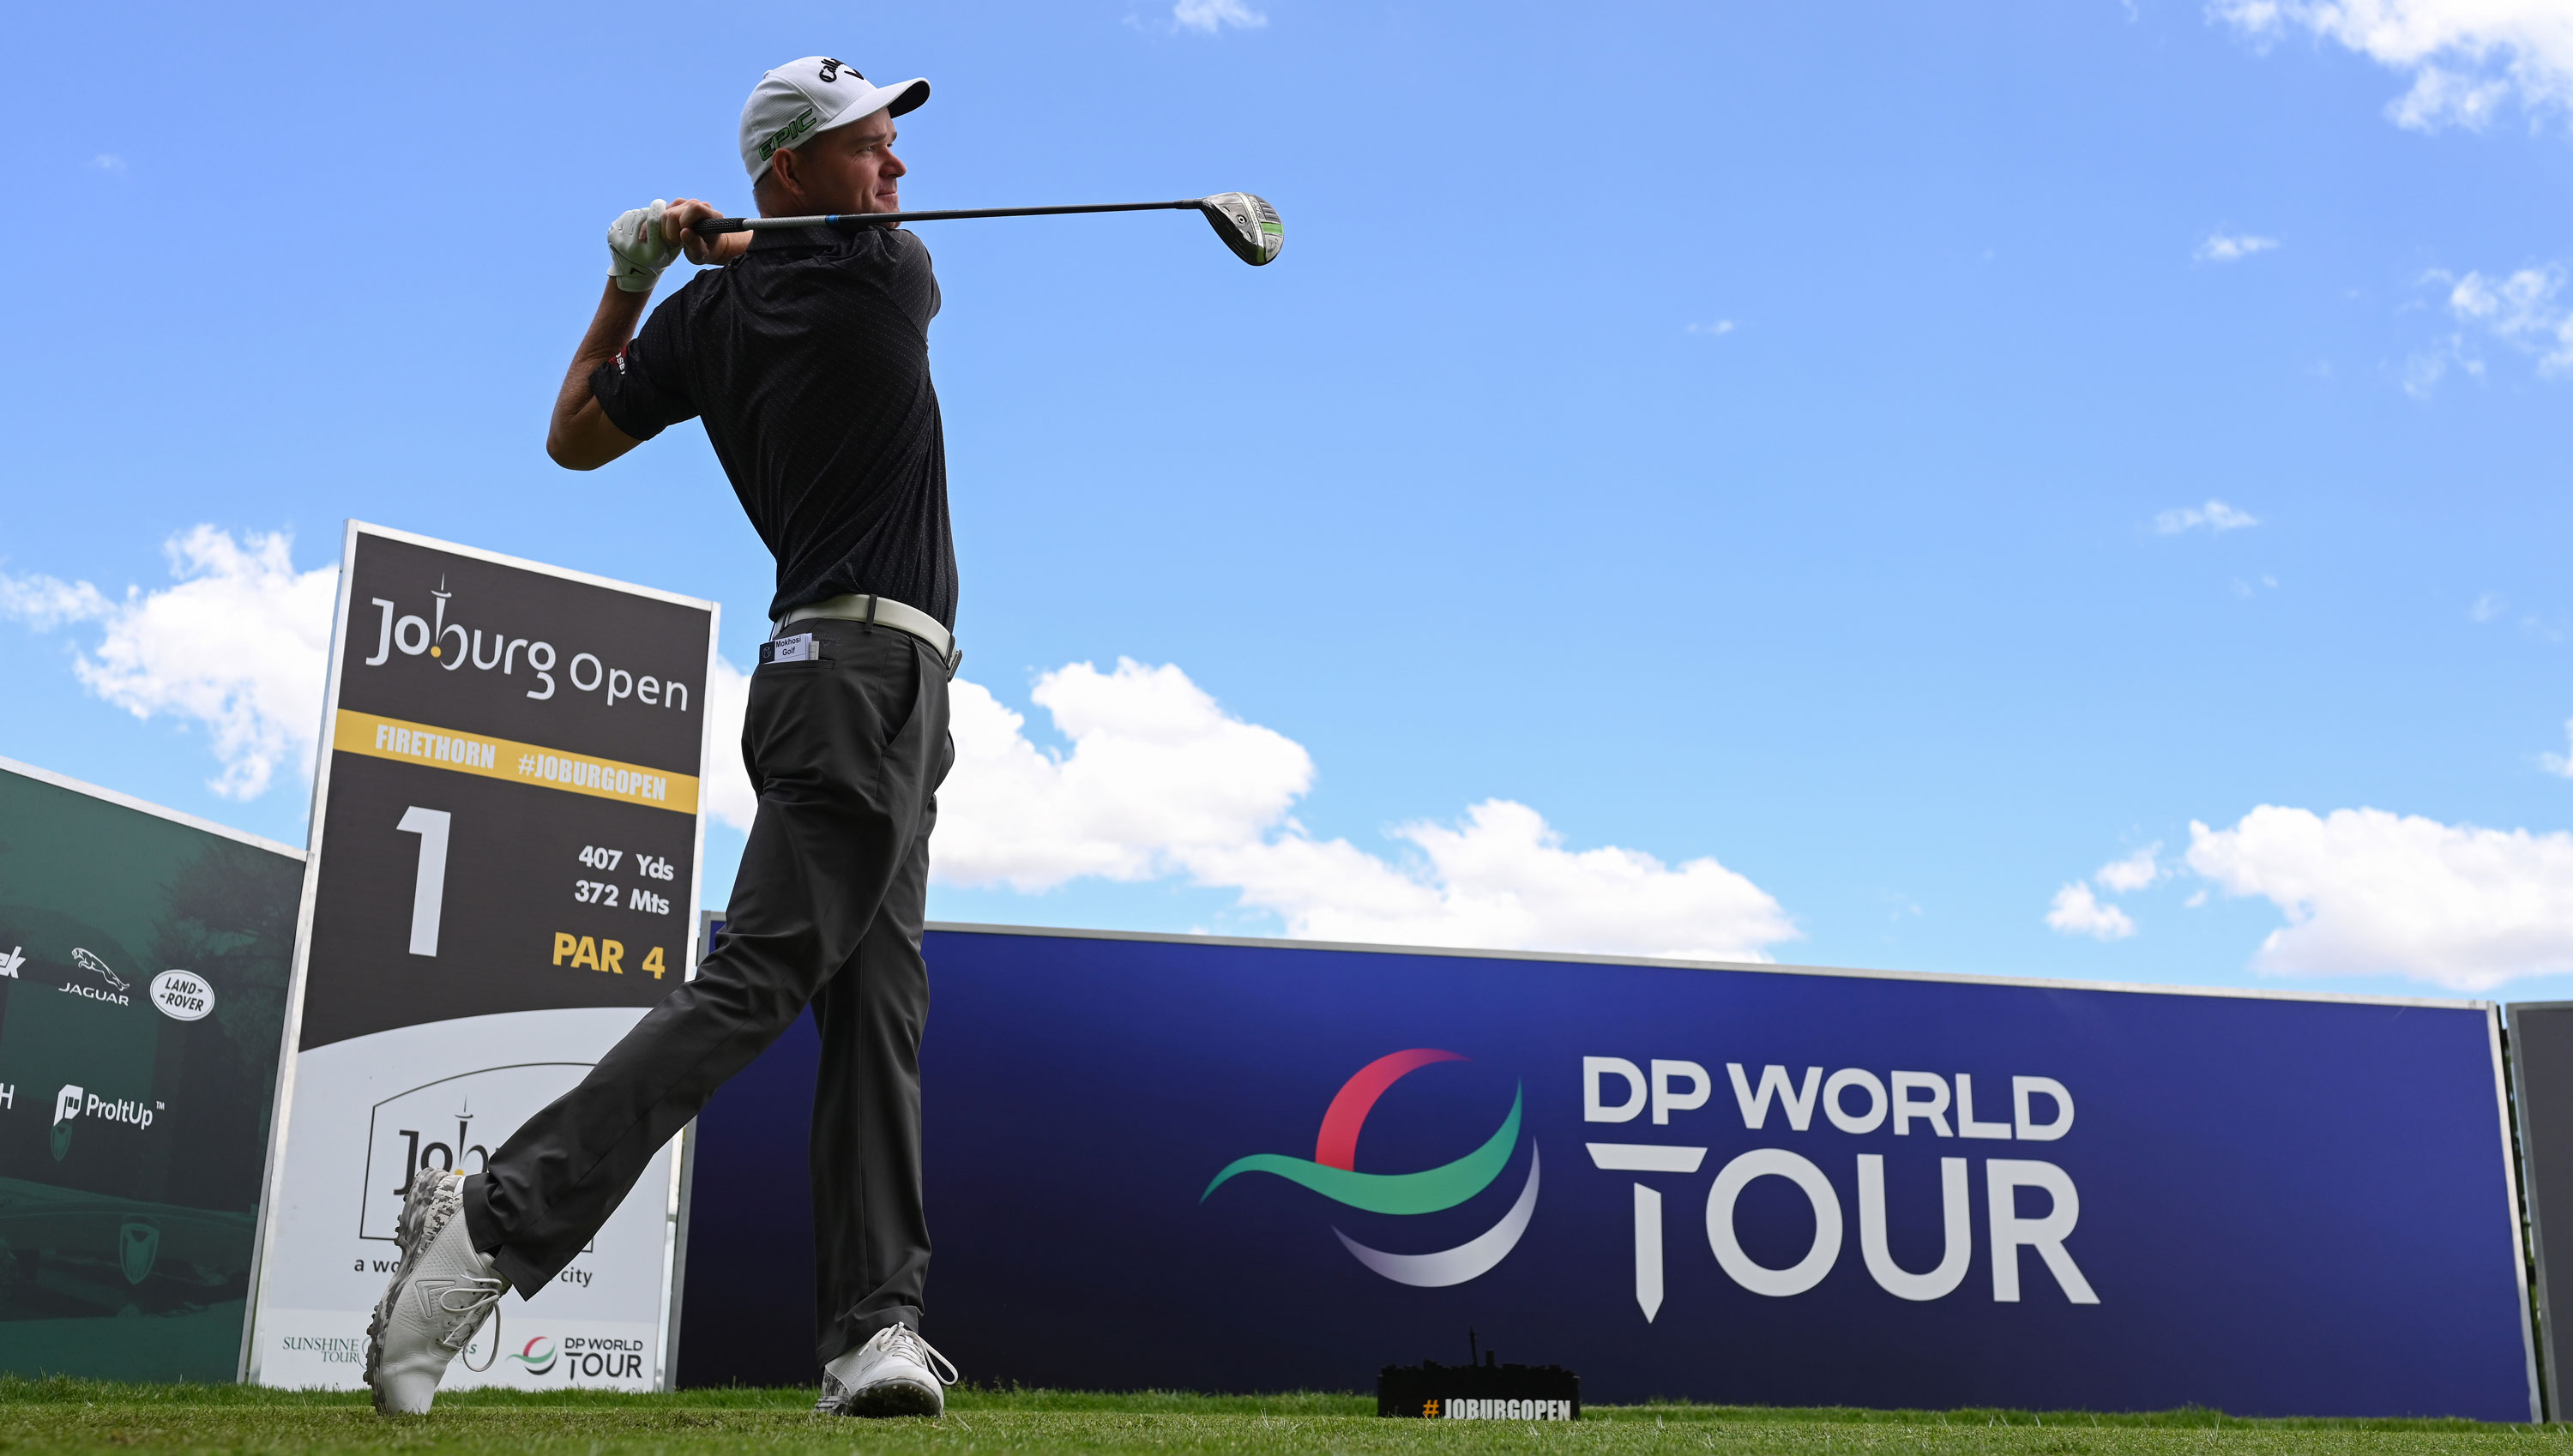 Latest Collaboration Makes DP World Tour Look Like a Minor League for the PGA Tour